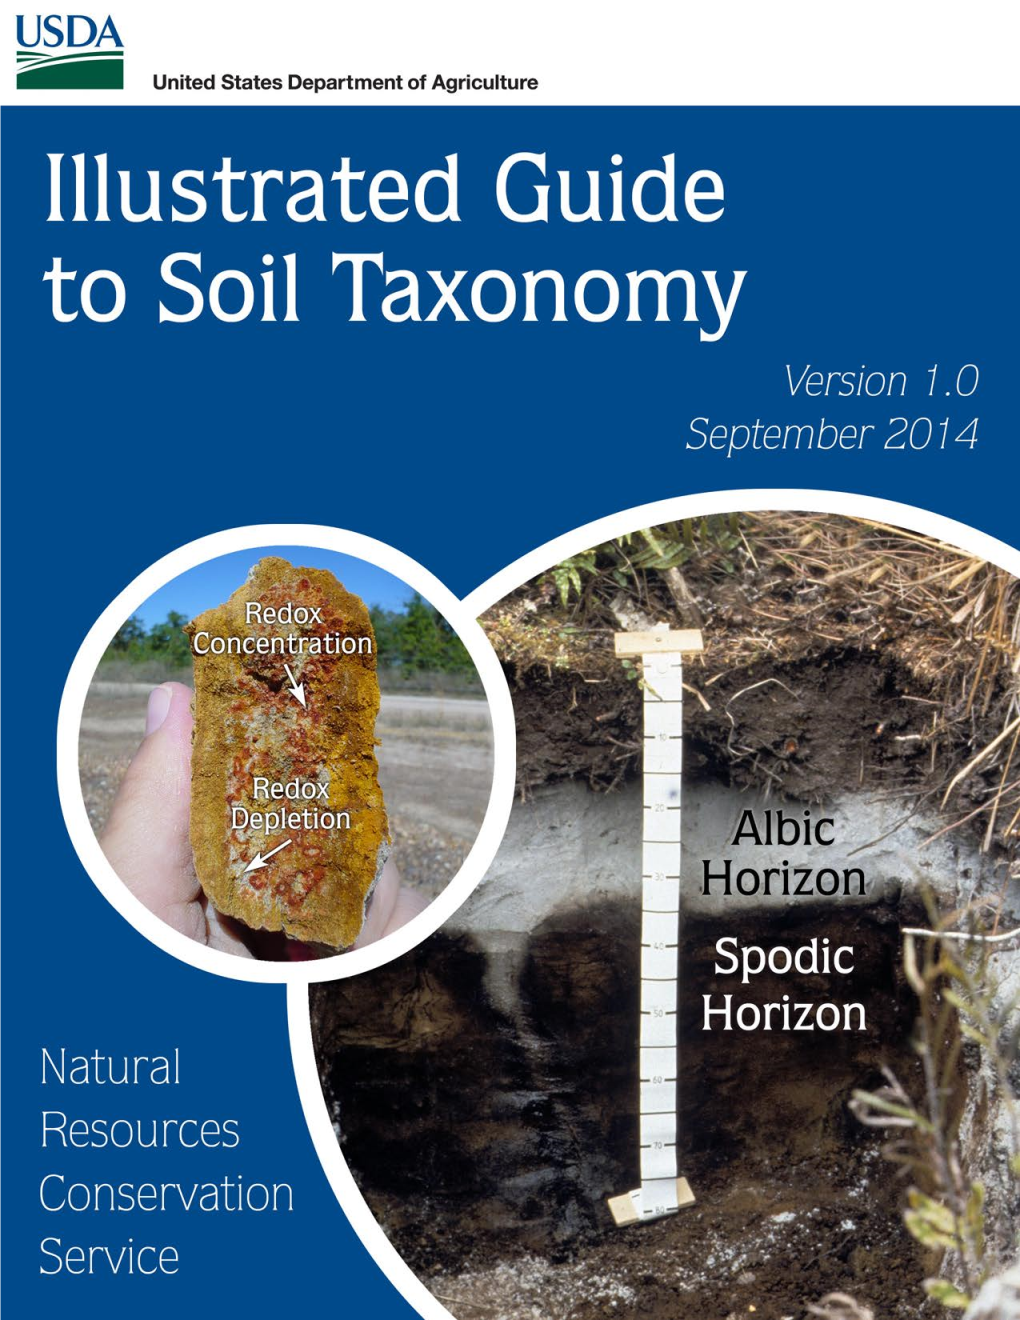 Illustrated Guide to Soil Taxonomy” Is Intended for Use by Multiple Audiences